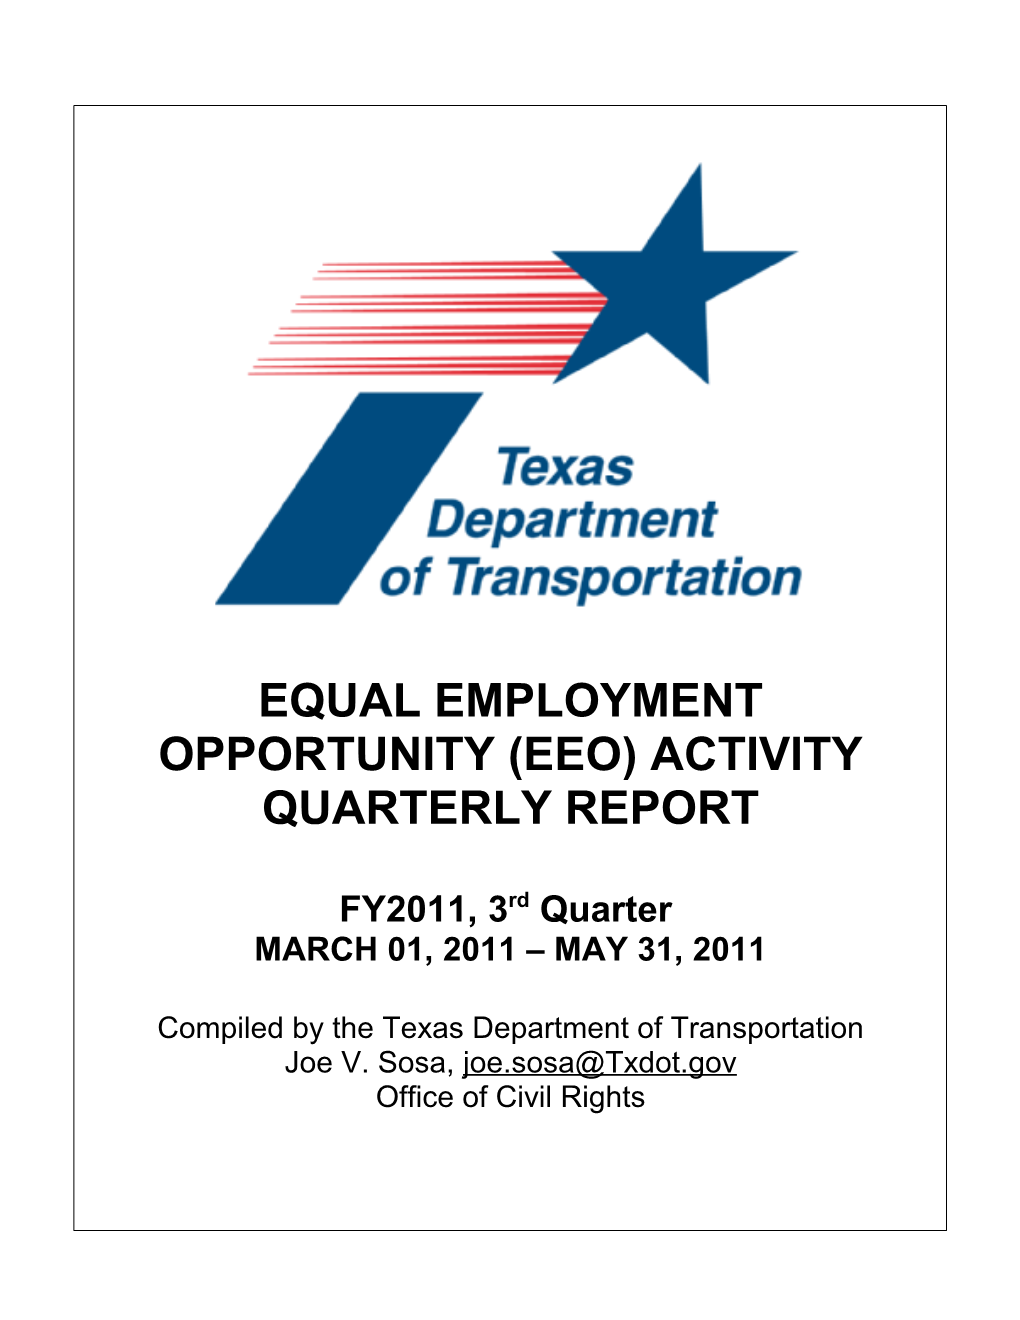 Equal Employmentopportunity (Eeo) Activity Quarterly Report